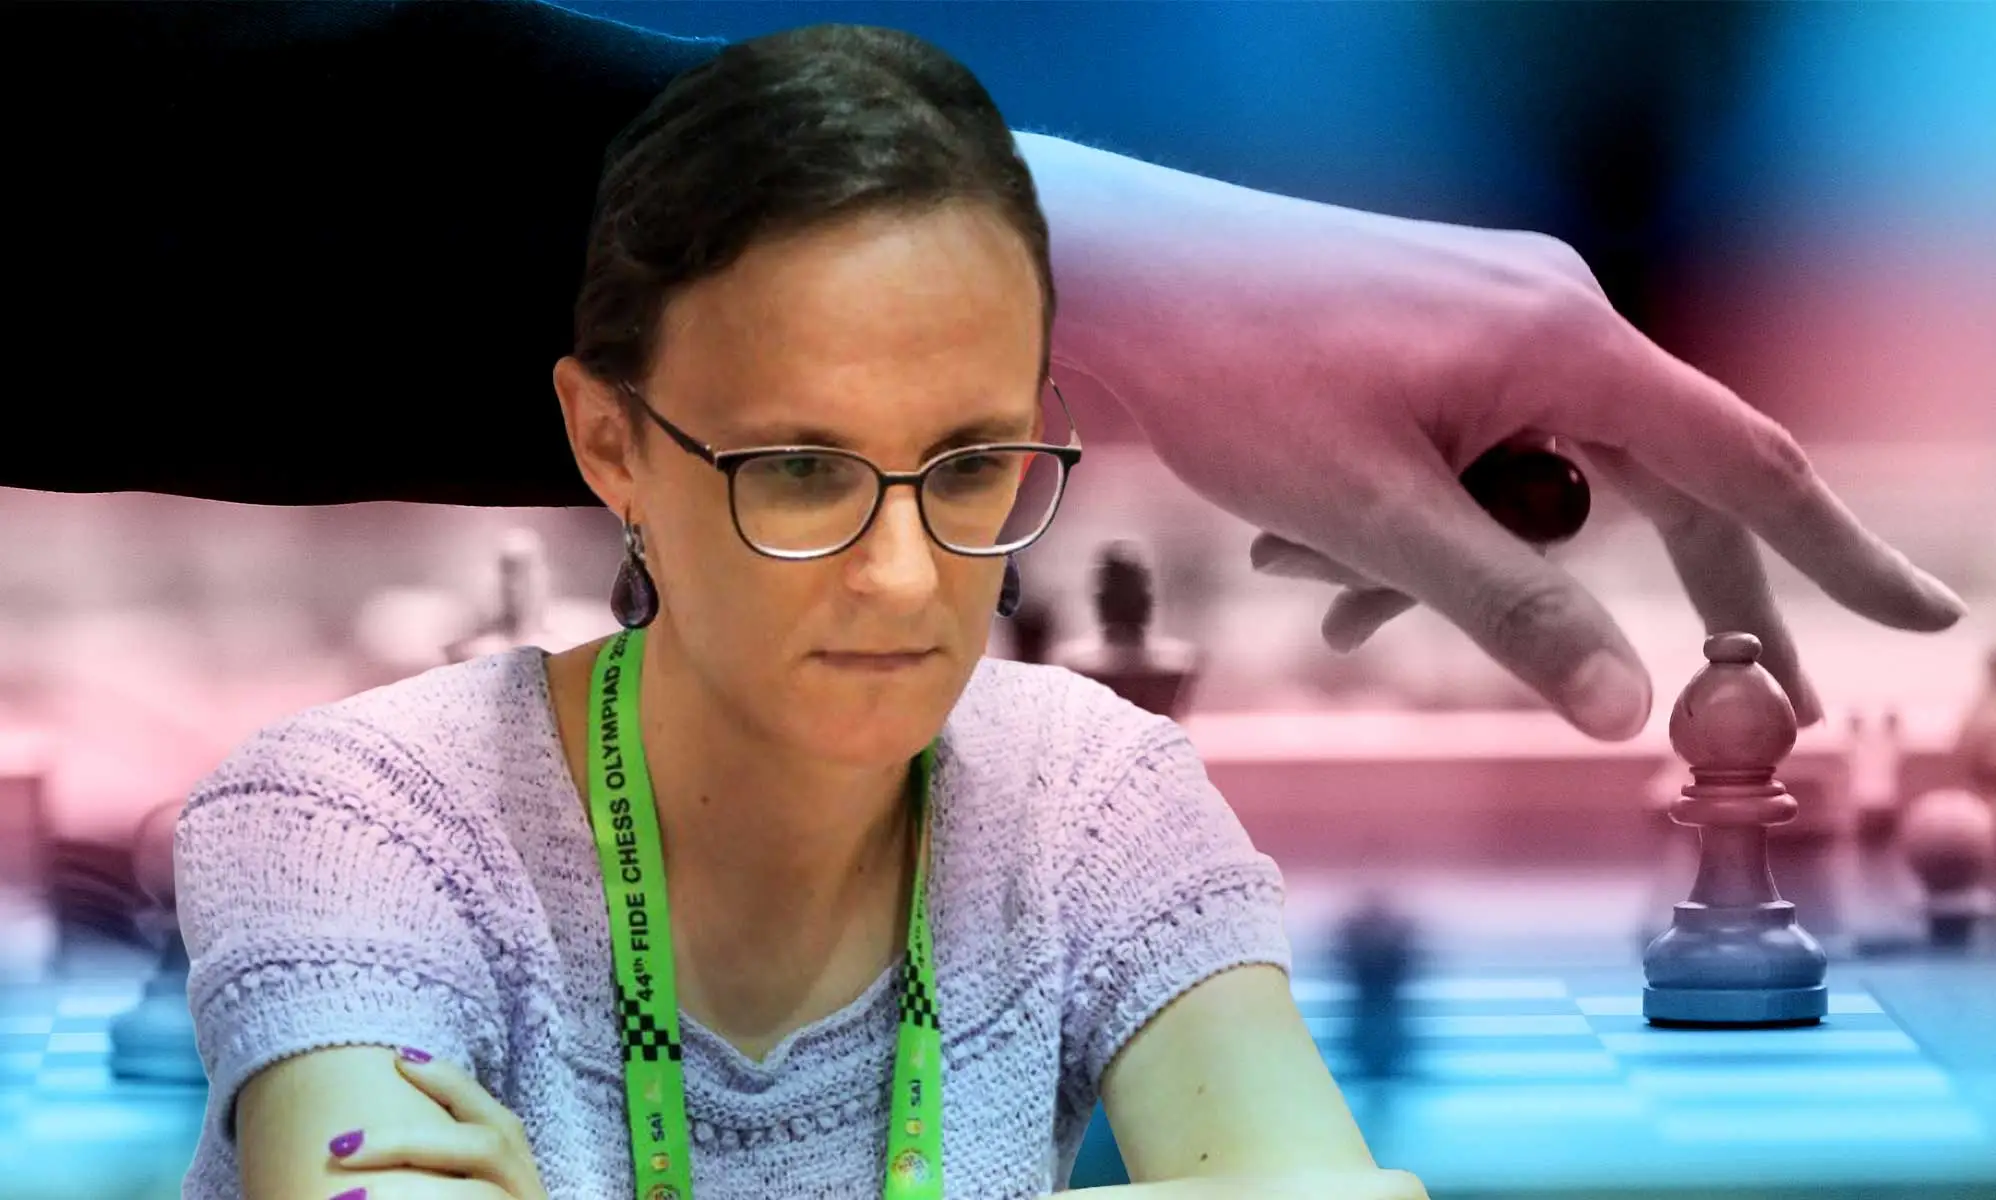 History-making trans player finds a 'home' in chess